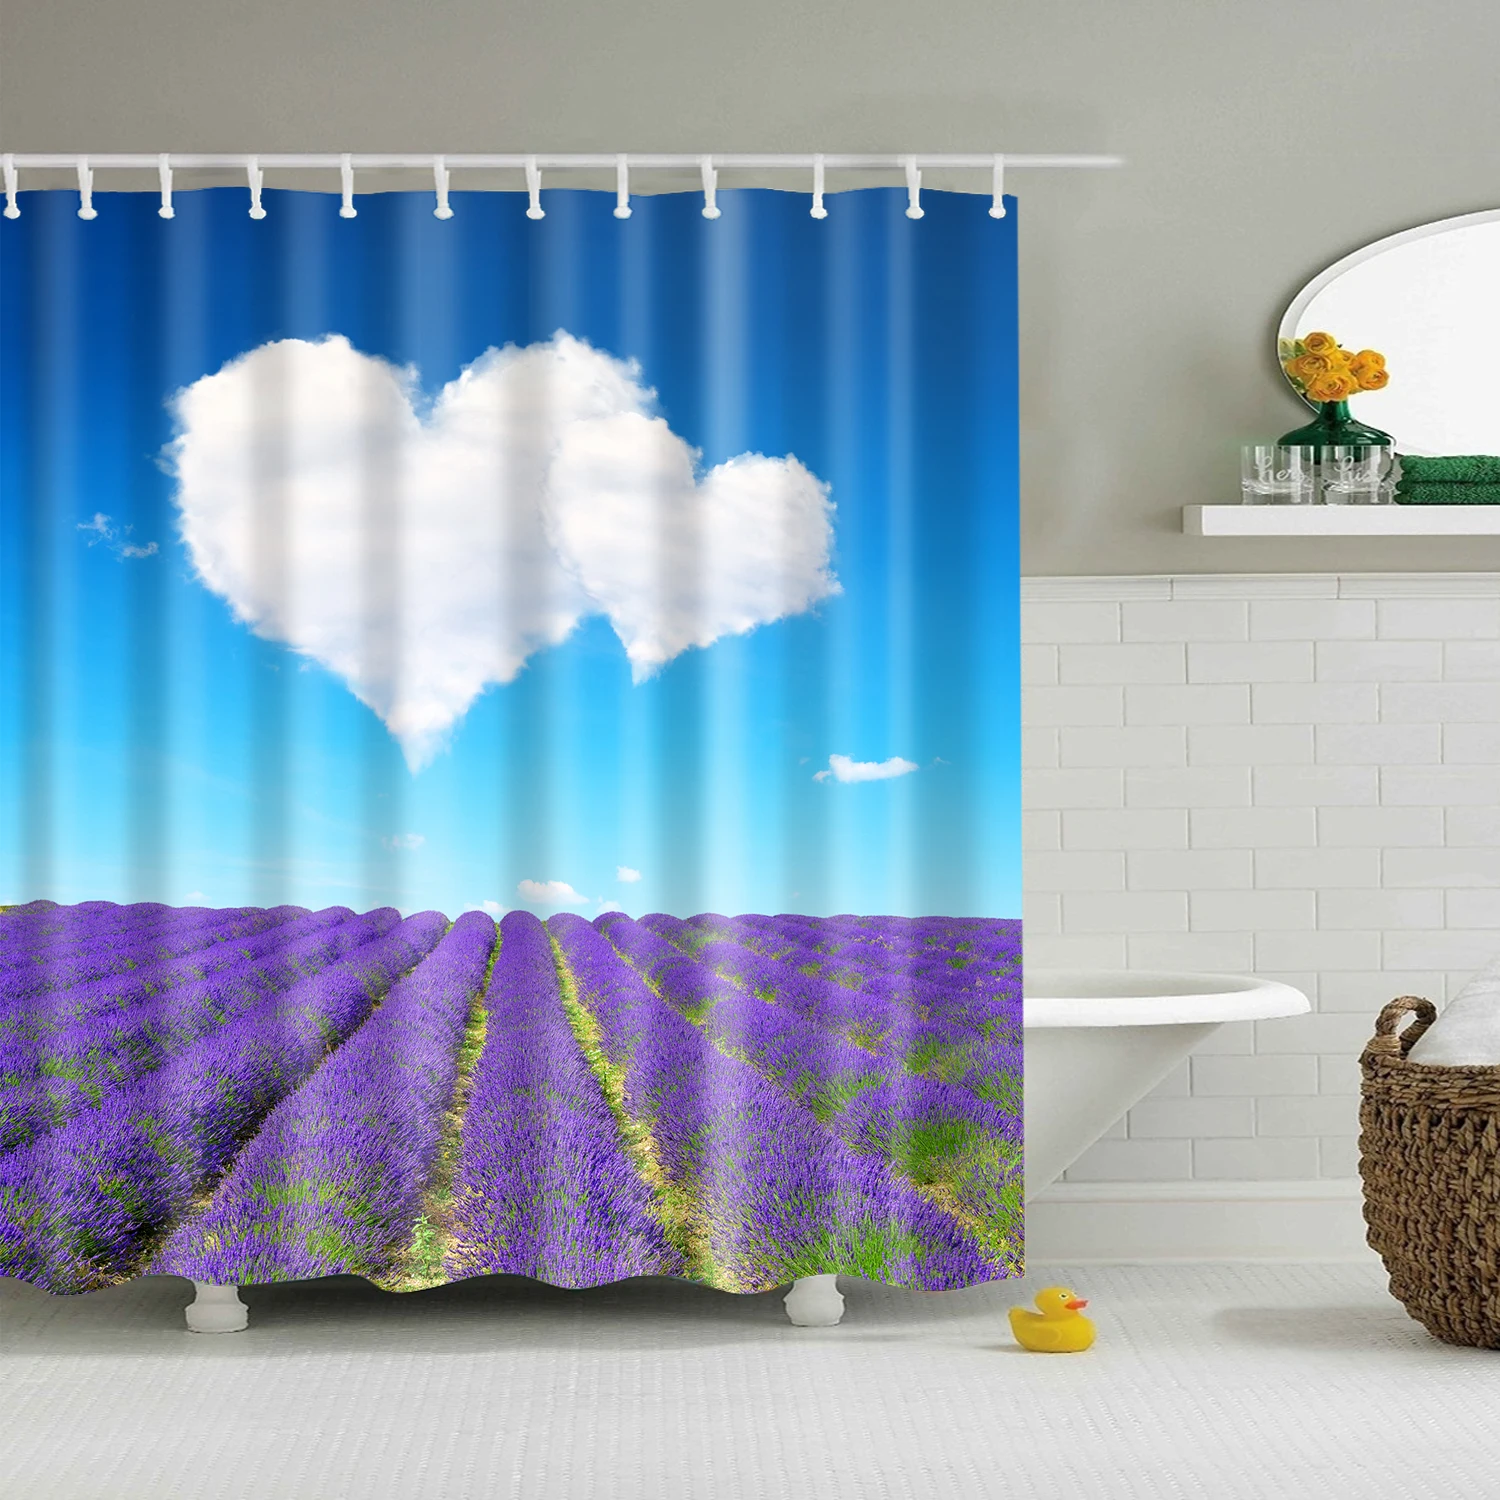 

Lavender Shower Curtain Serene Field View in Tihany Hungary Dramatic Dreamy Sunset Sky Nature Cloth Fabric Bathroom Decor Set